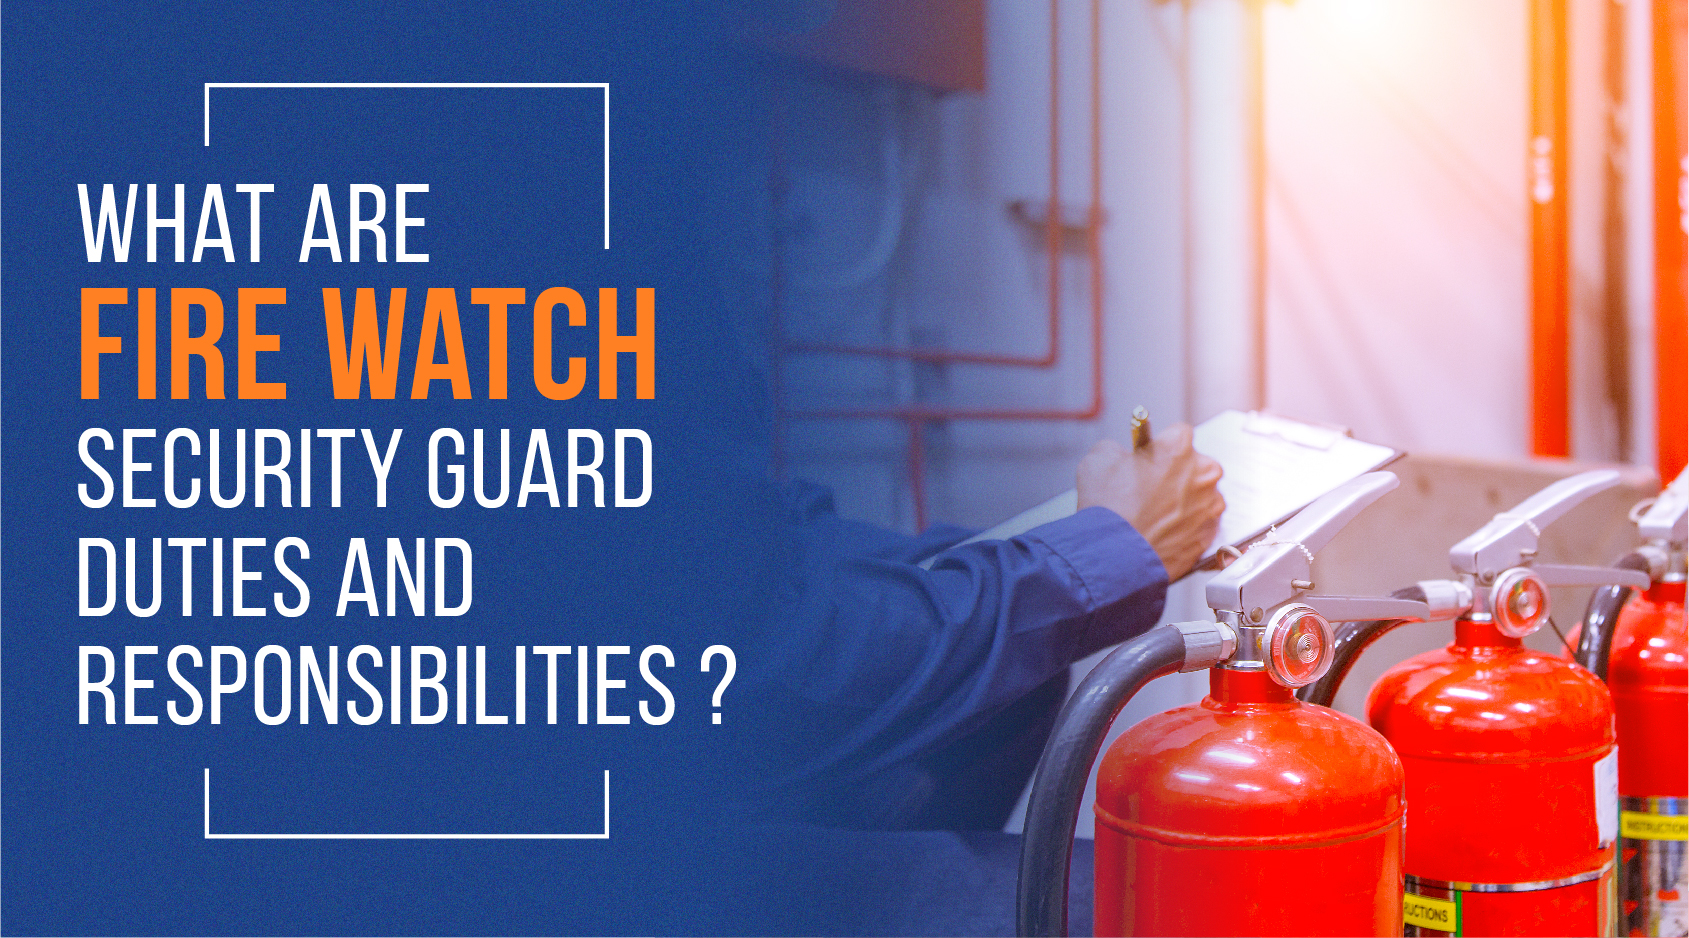 What are fire watch security guard duties and responsibilities